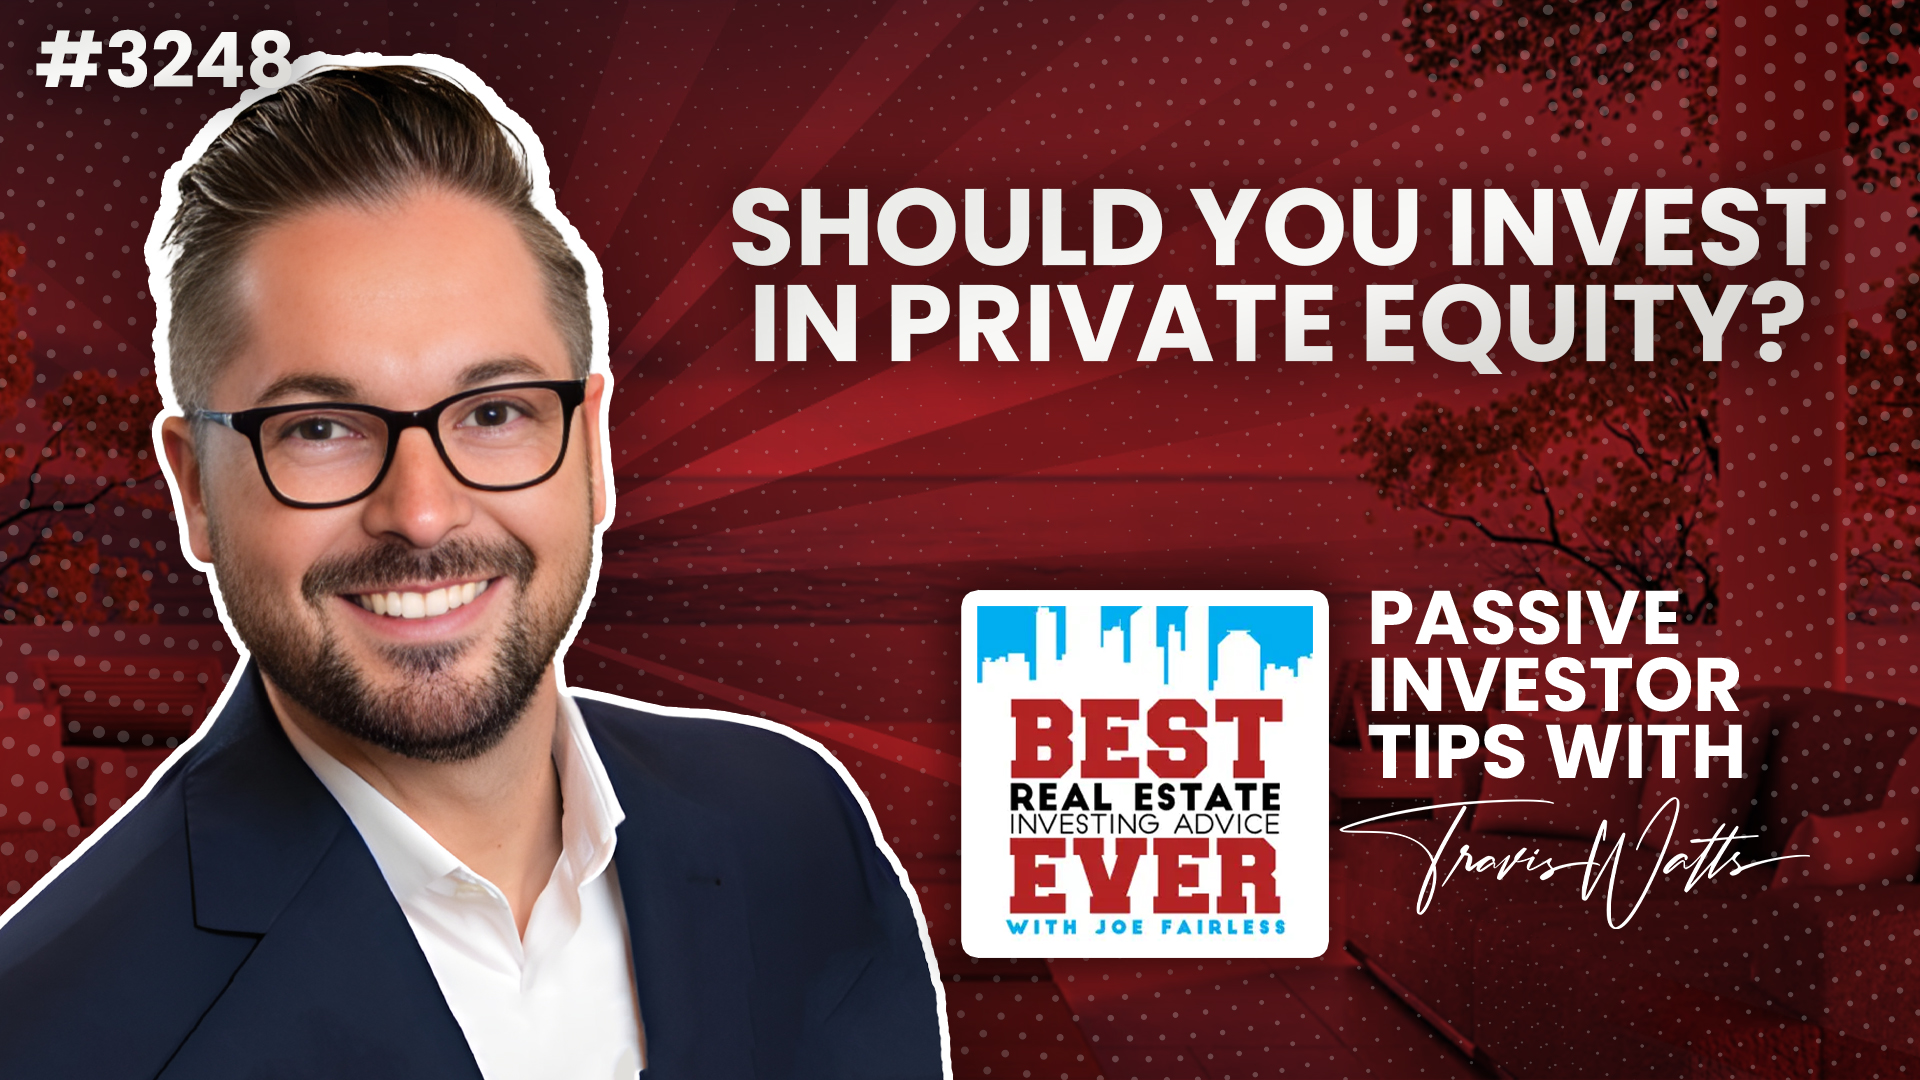 JF3248: Should You Invest in Private Equity? | Passive Investor Tips ft. Travis Watts